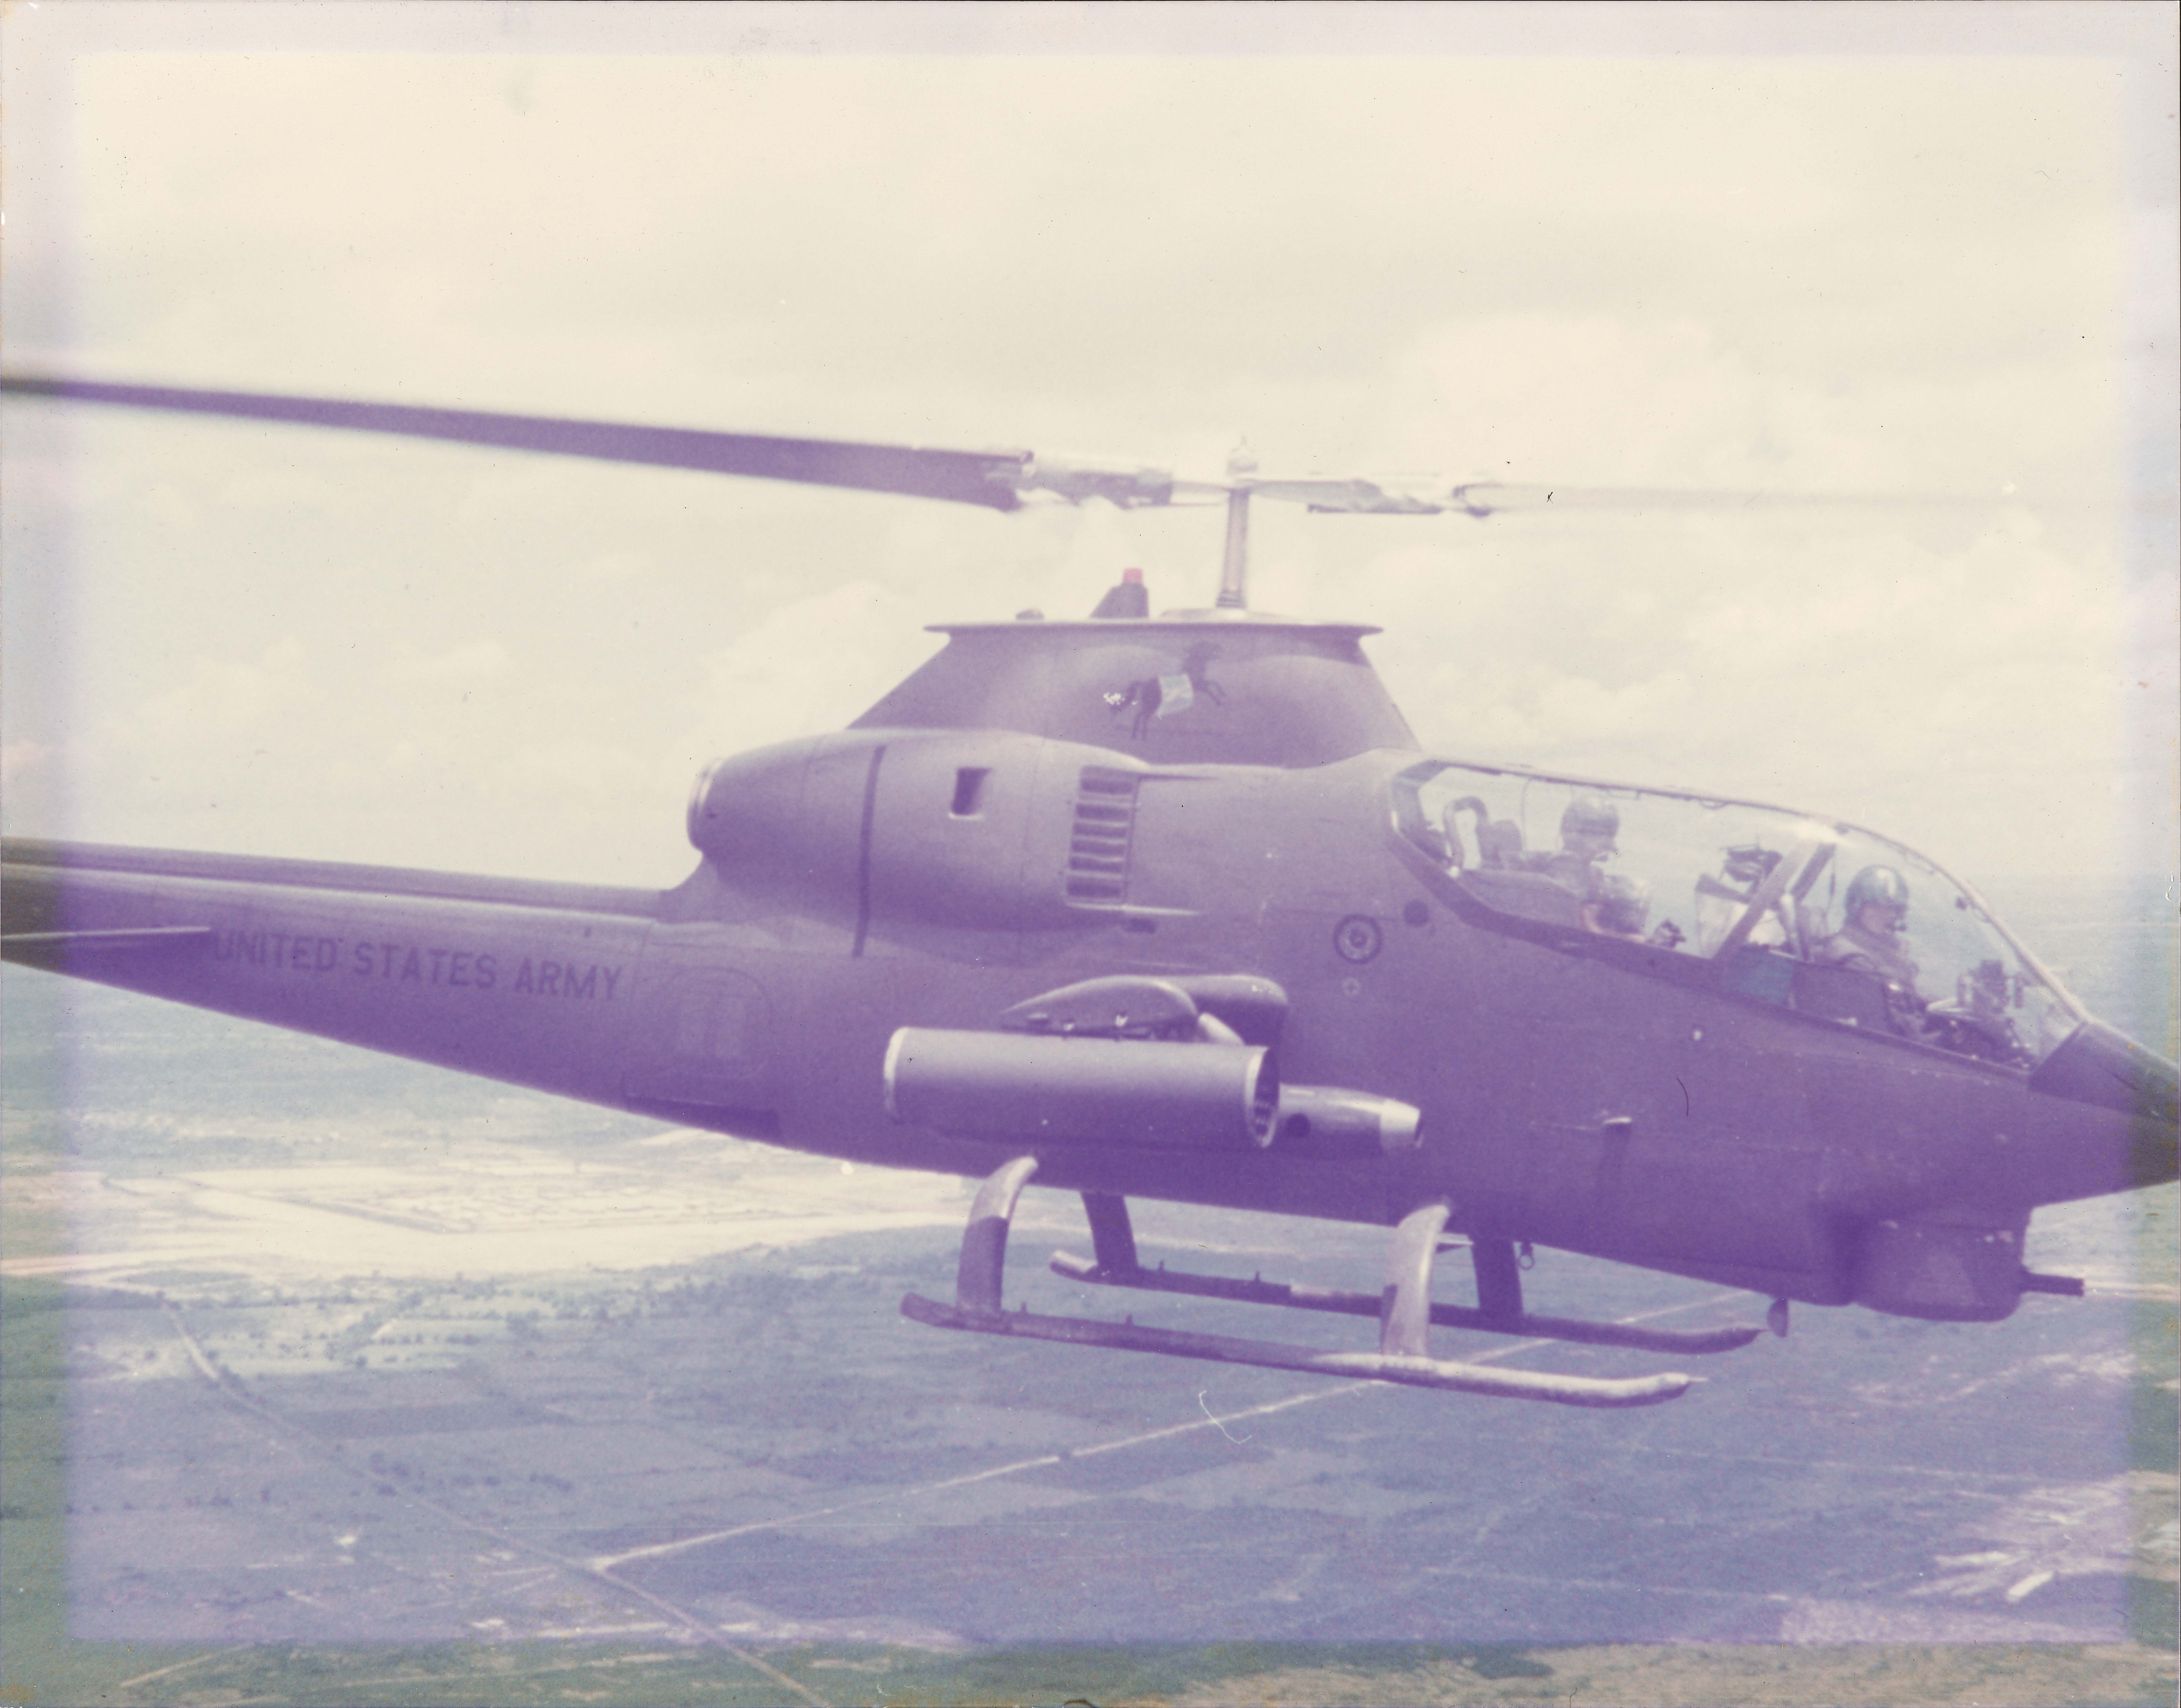 Larry Taylor Ah 1G Cobra Helicopter Scanned From Original